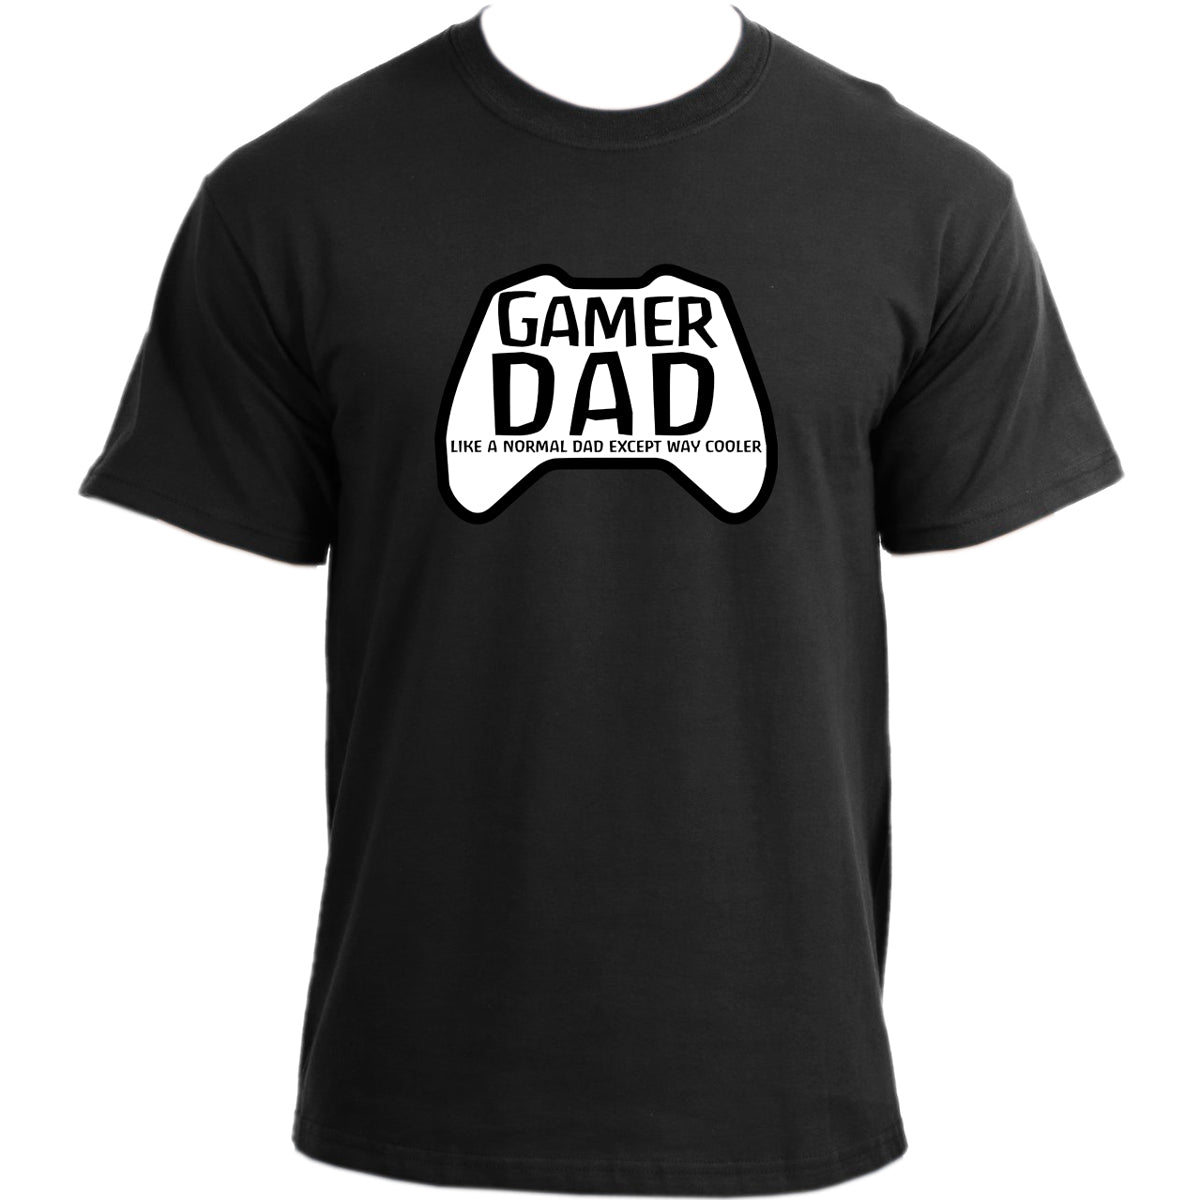 Gamer Dad T-shirt I Like a normal dad except way cooler I Gamer Tee I Funny Videogame Gaming T shirt